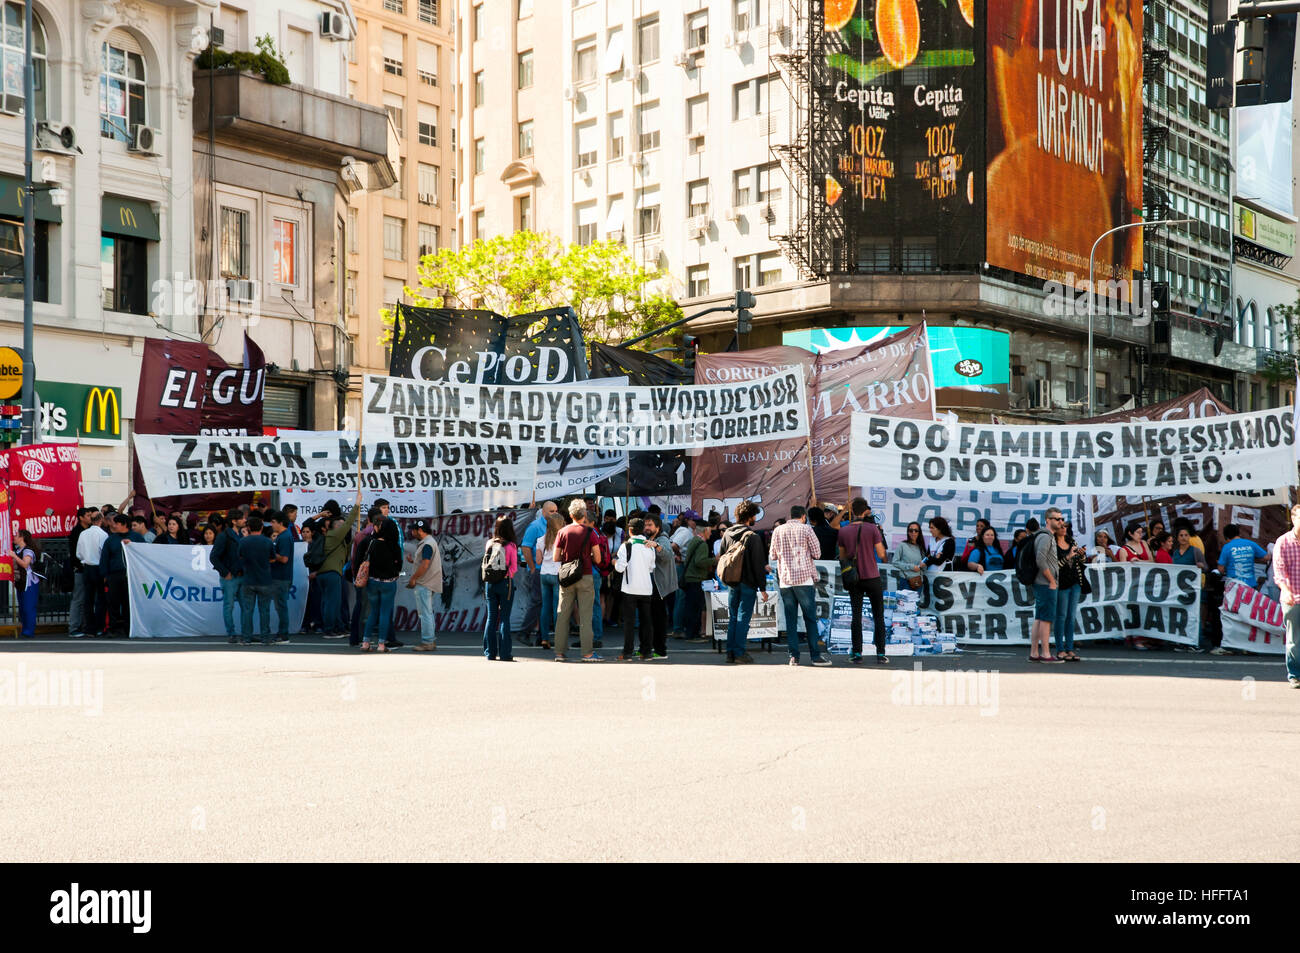 Protest - Buenos Aires - Argentina Stock Photo